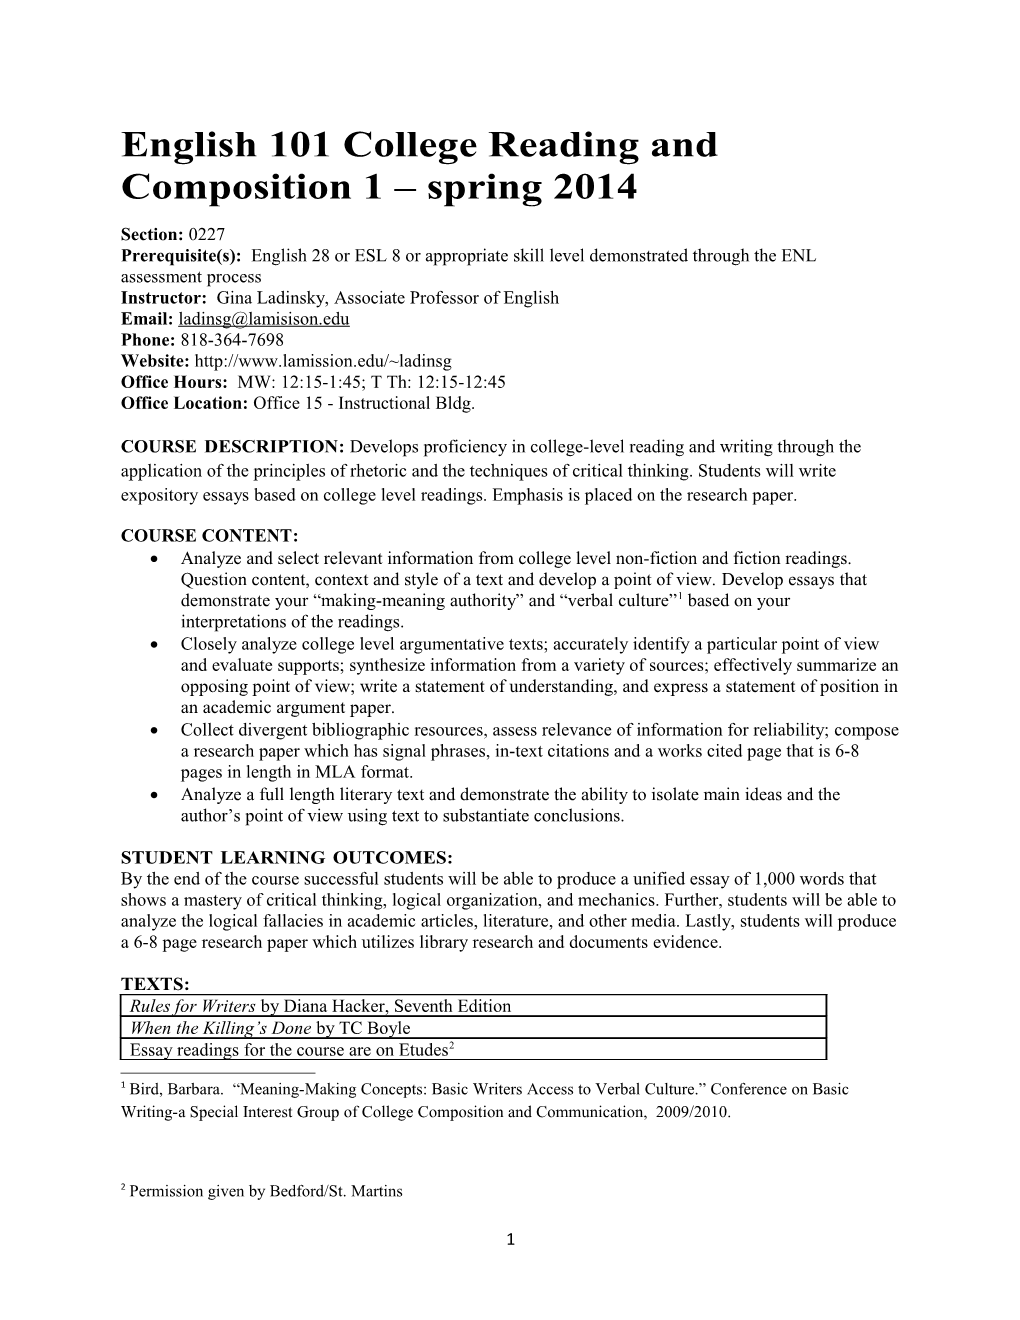 English 101 College Reading and Composition 1 Spring 2014